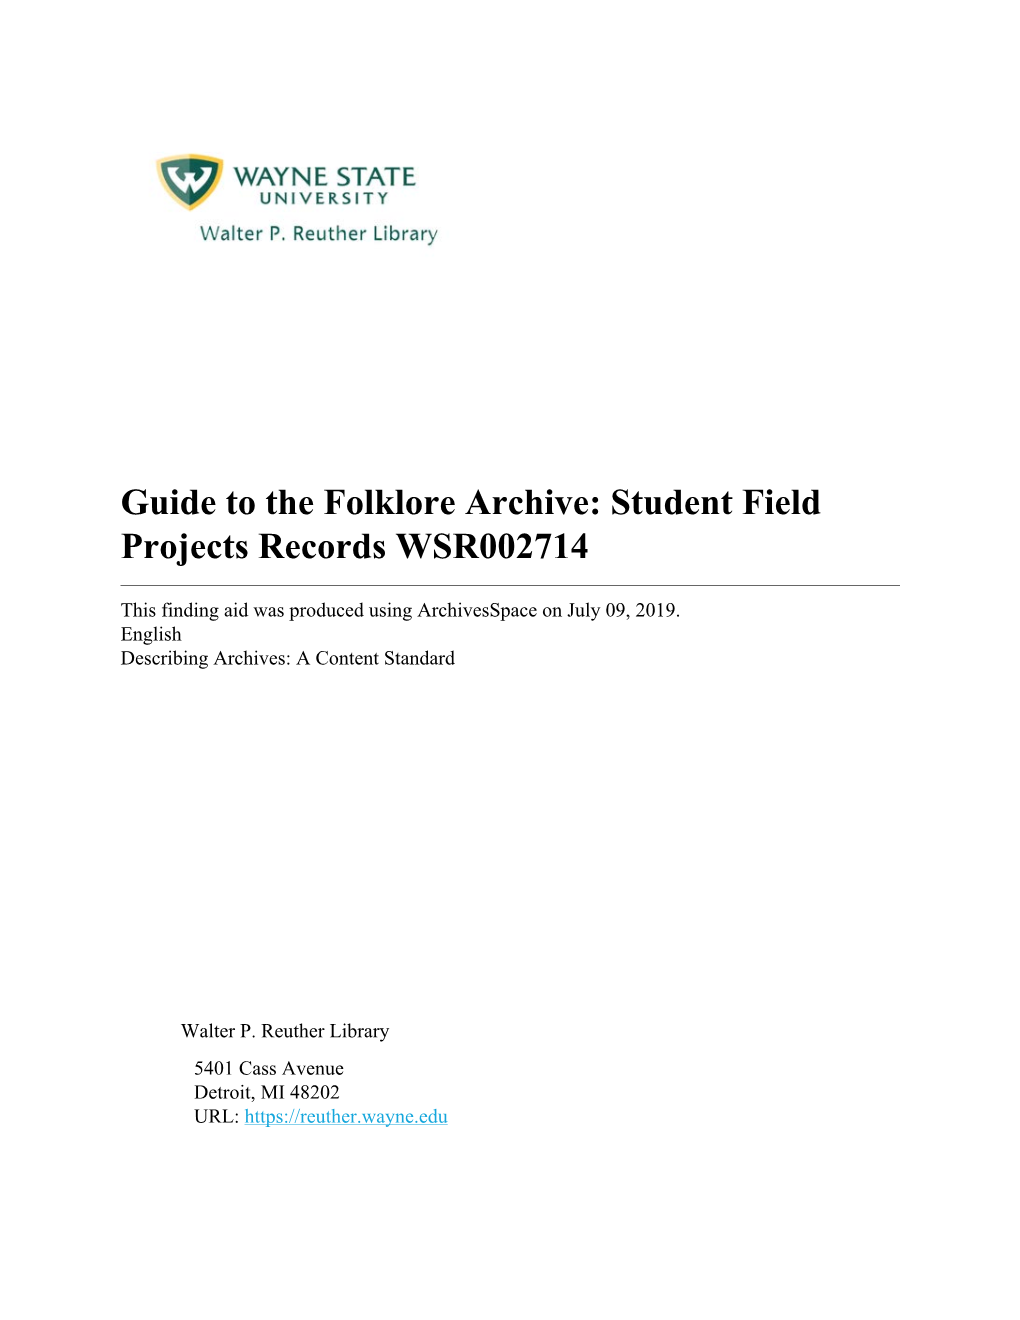 Folklore Archive: Student Field Projects Records WSR002714